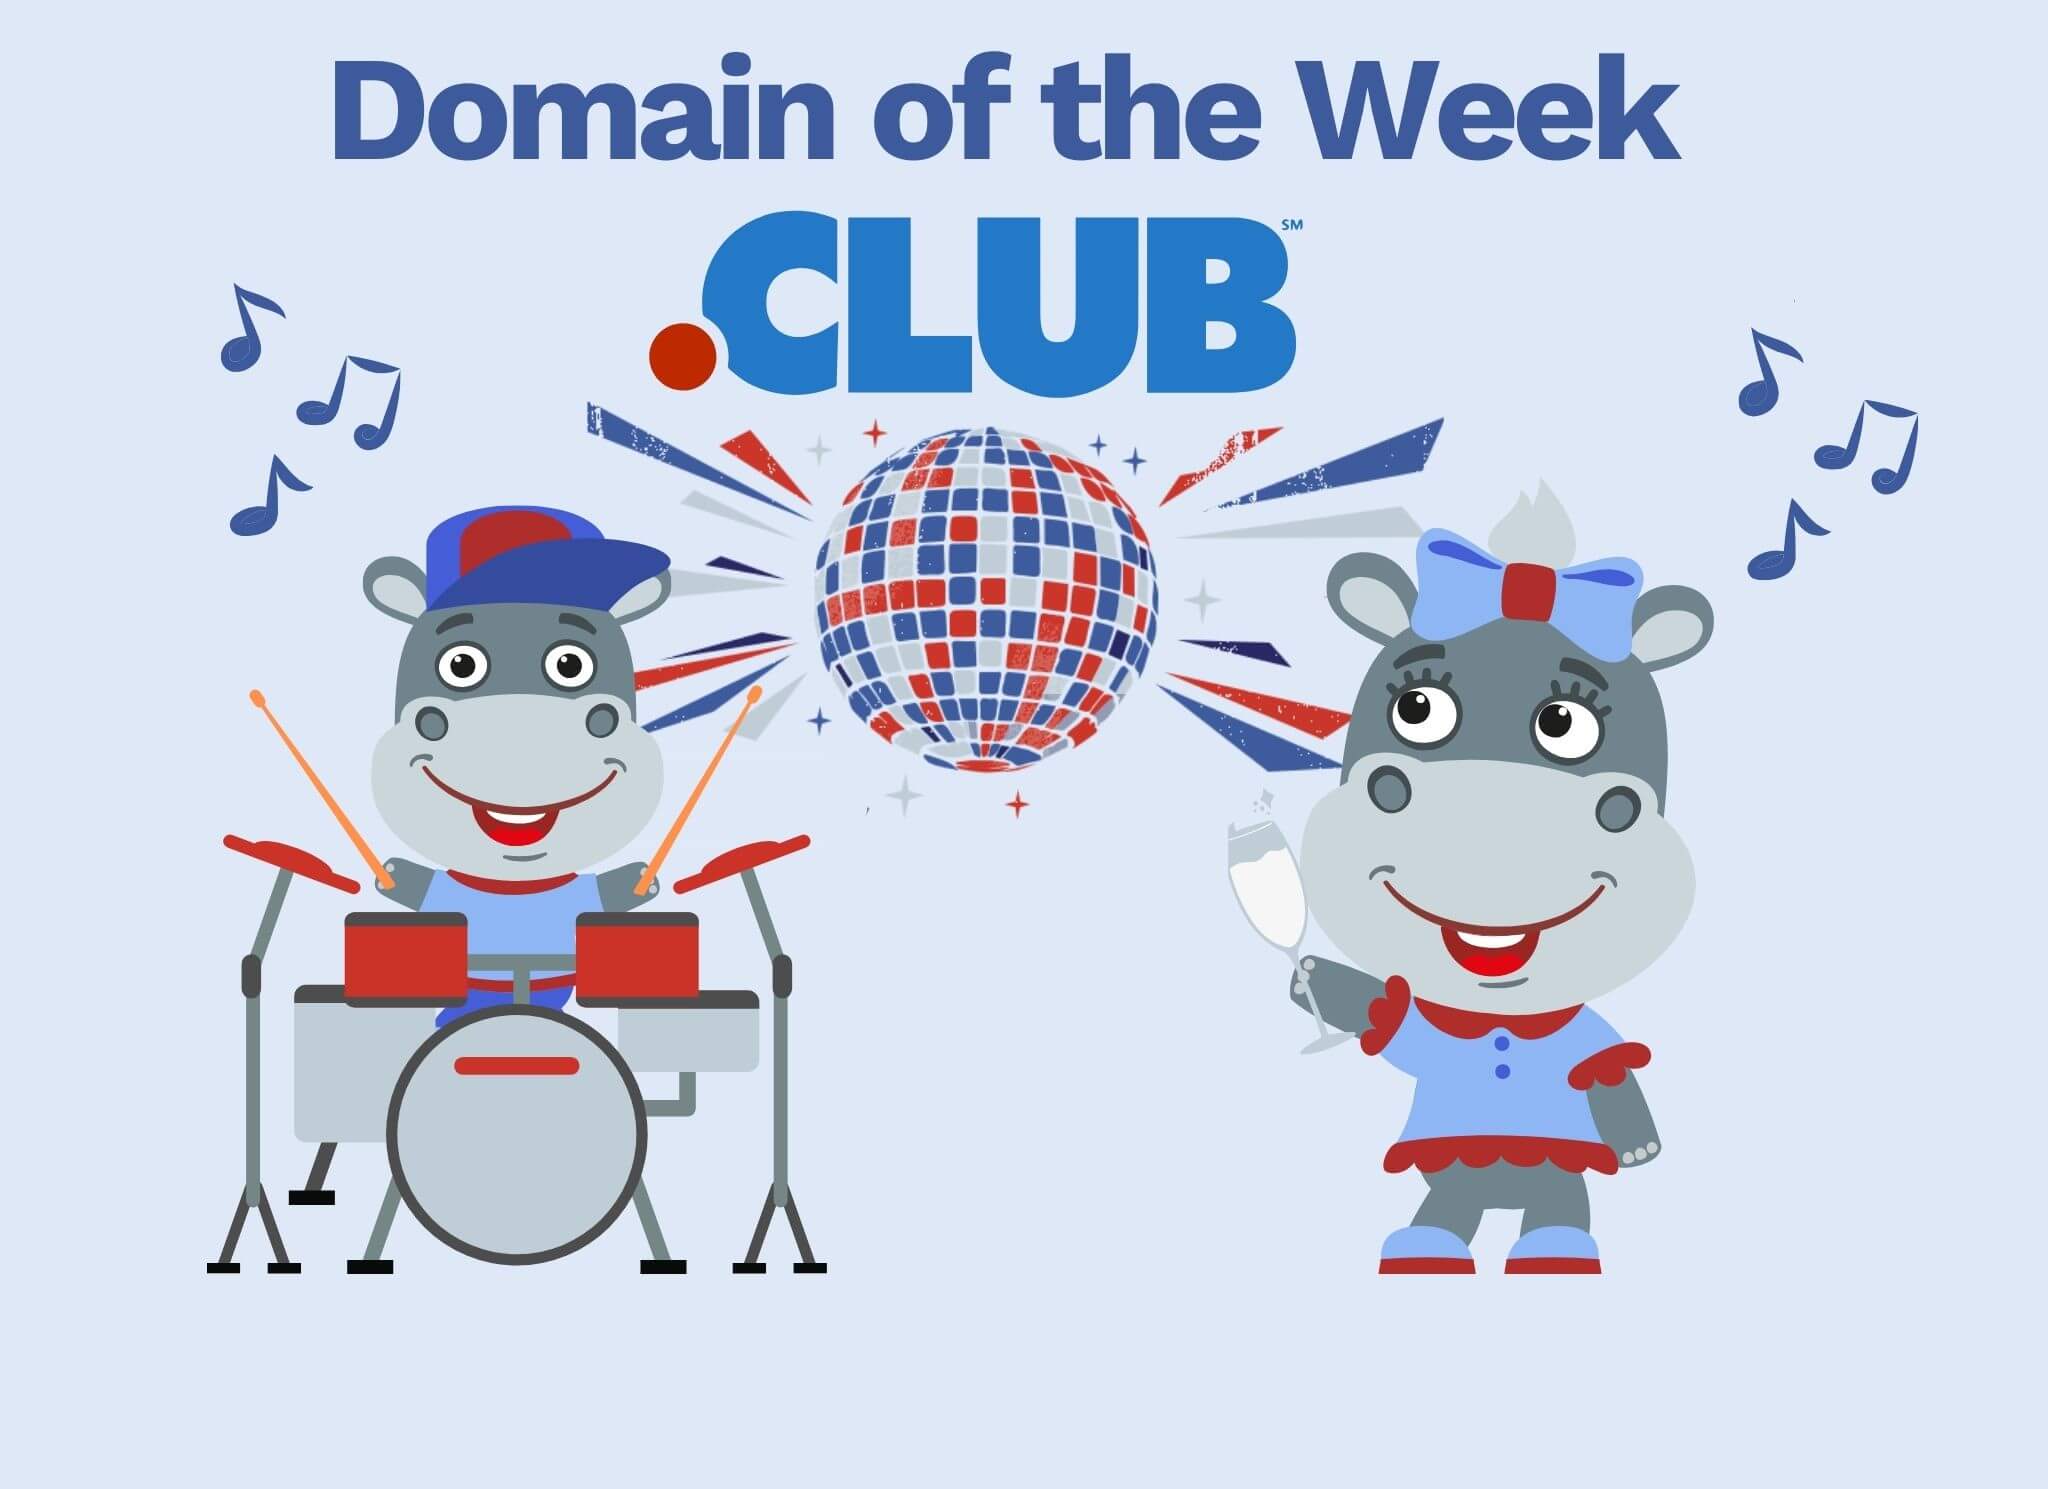 Domain of the Week. A .club domain from Hipposerve